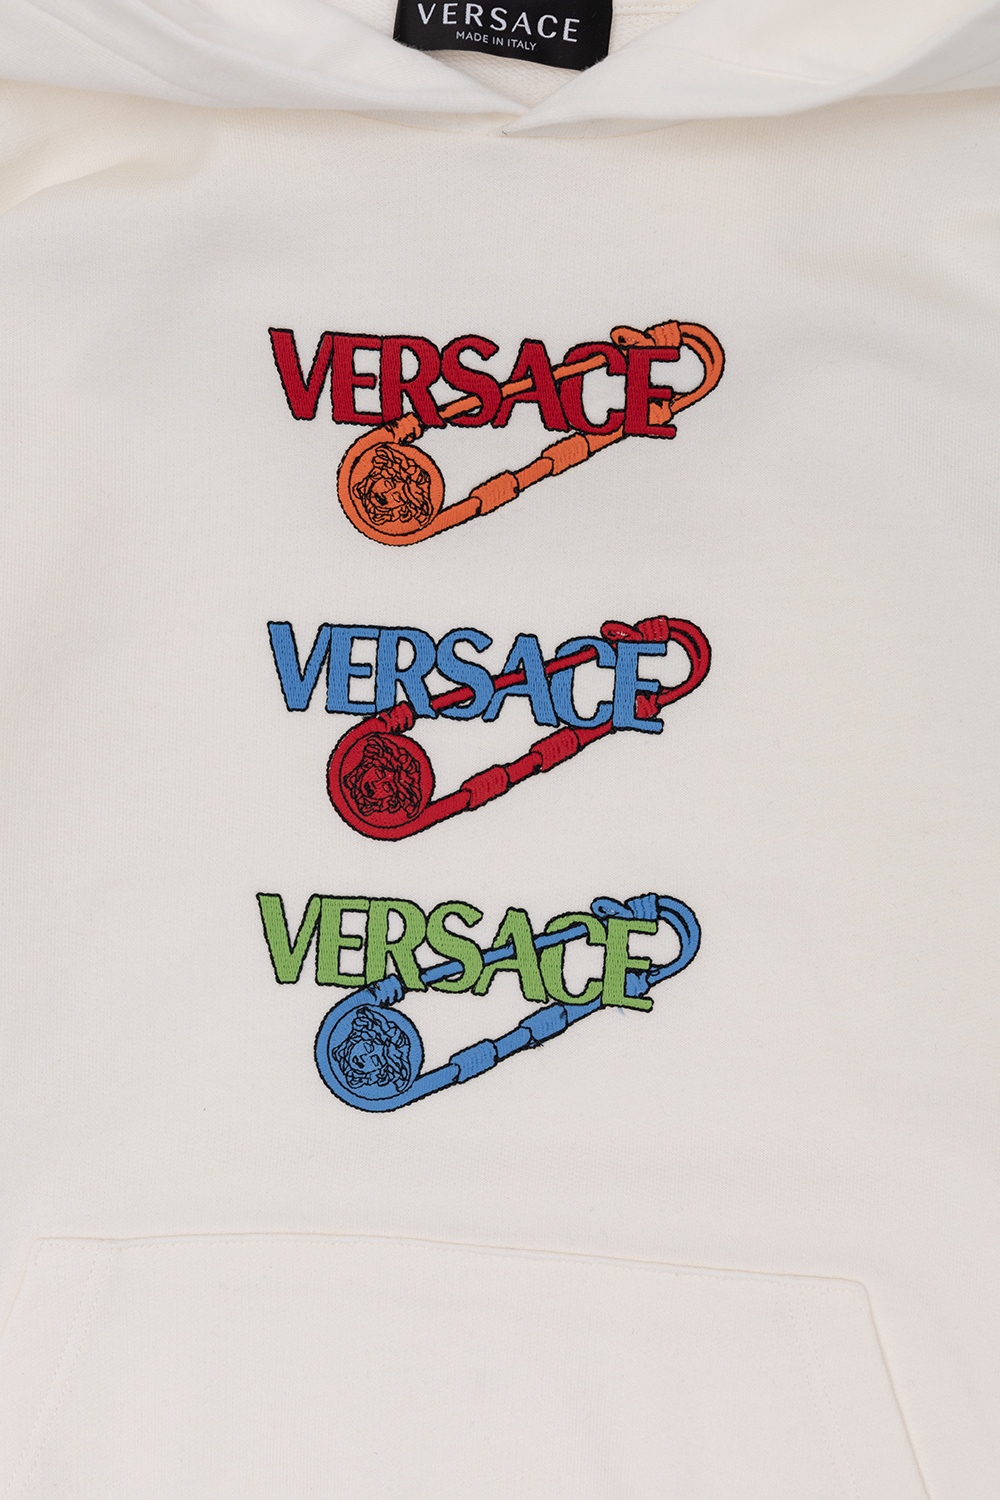 Versace Kids Nike Americana Air Max Shoes and Clothing